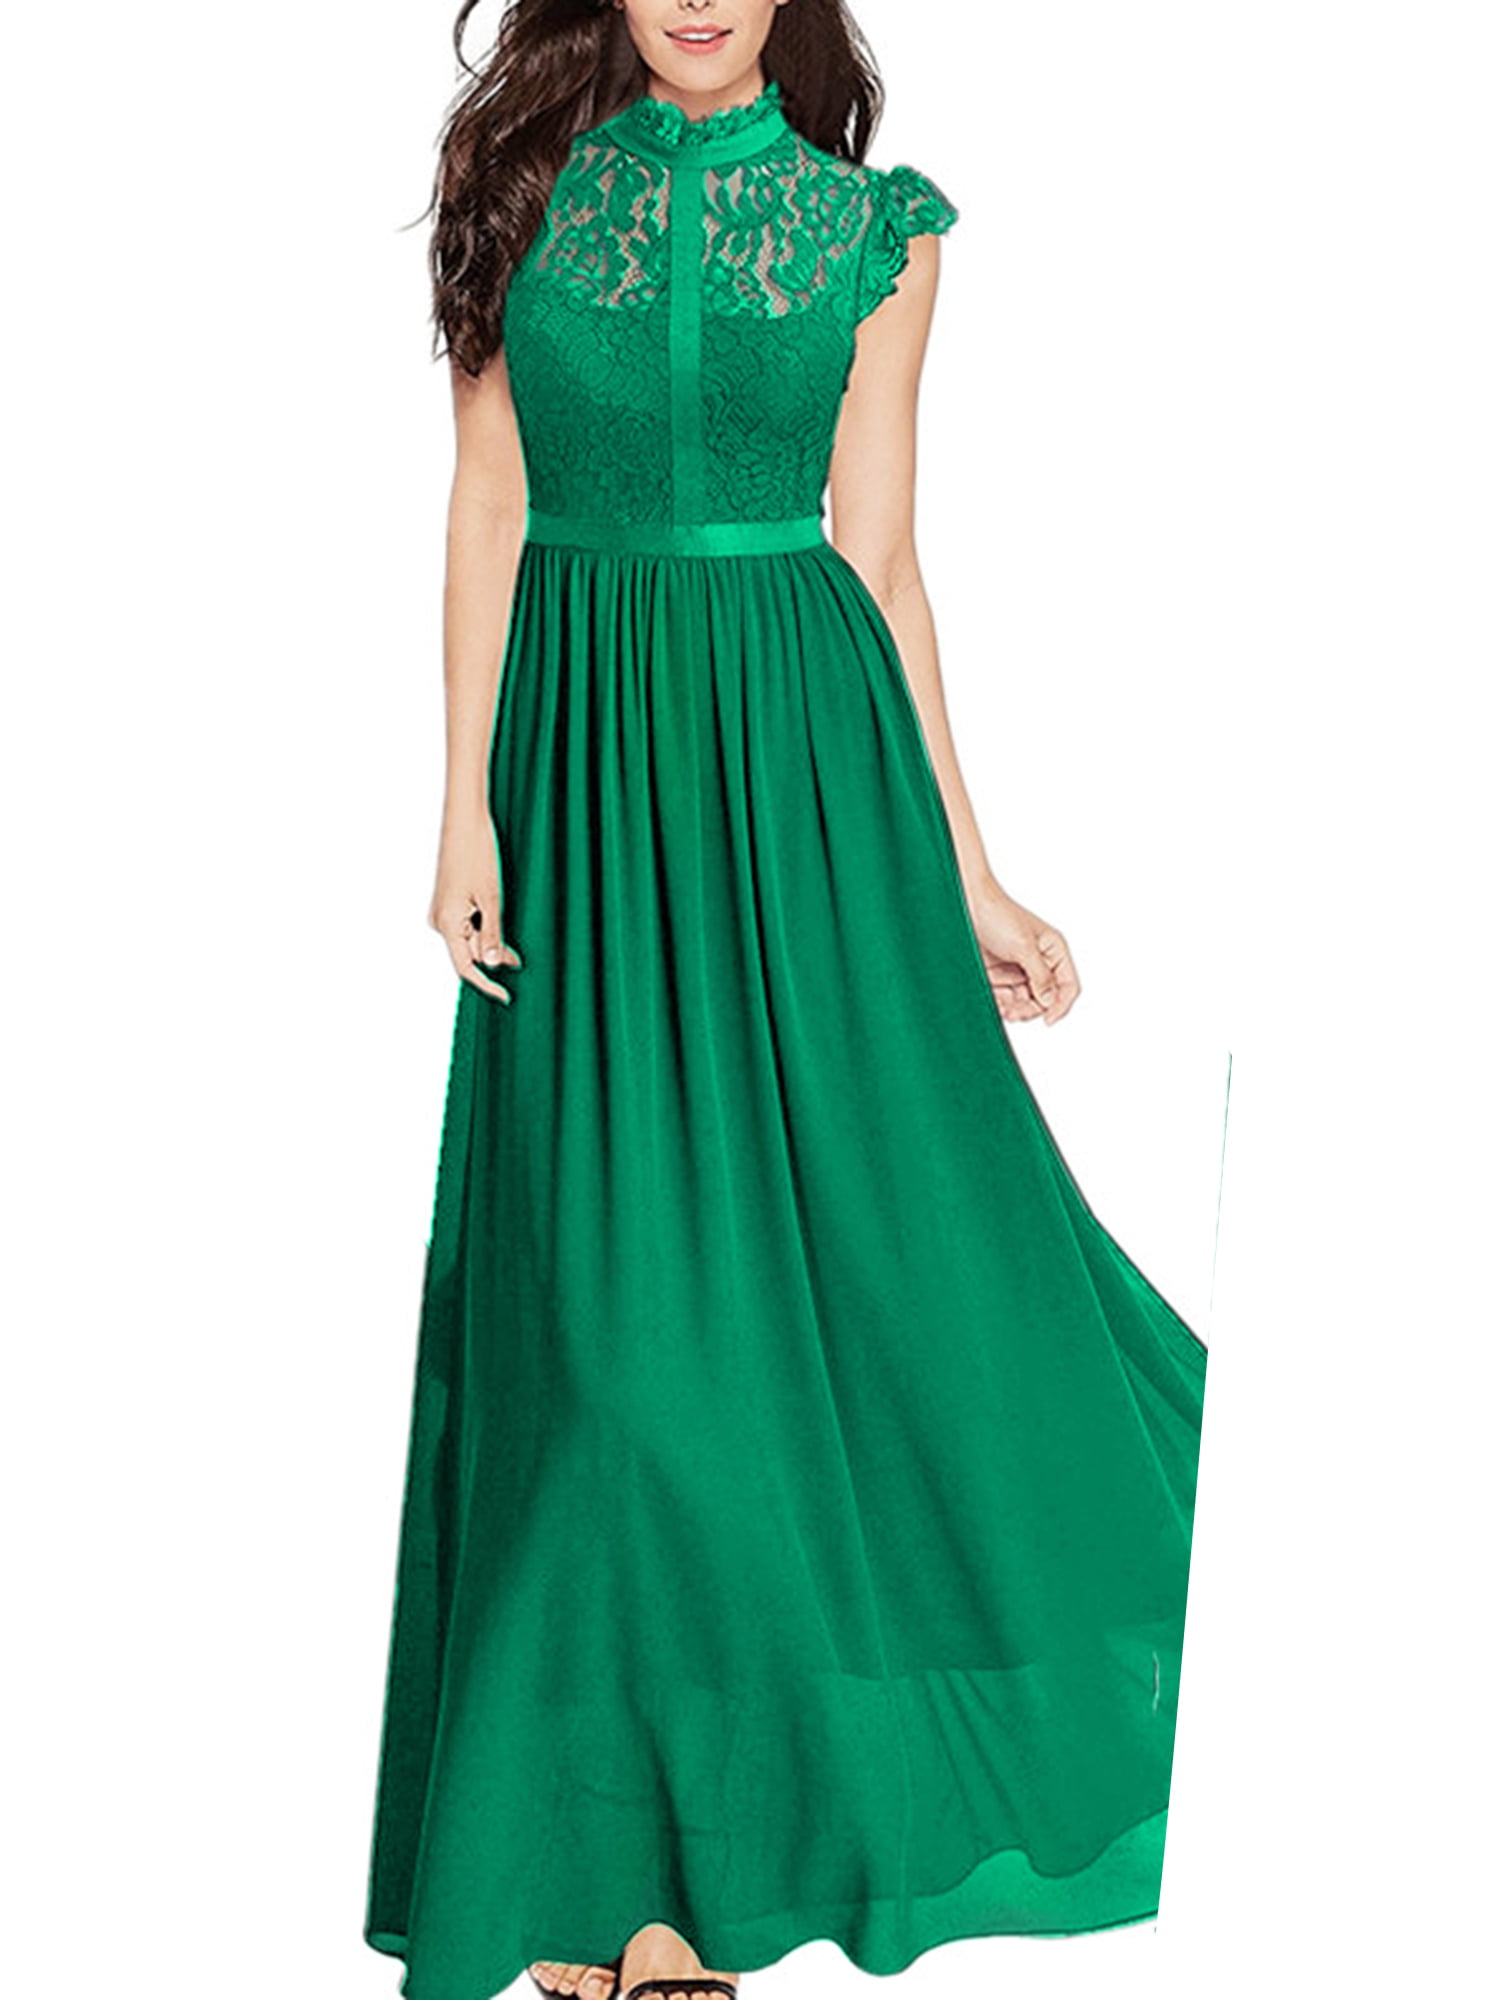 Long Women Formal Evening Ball Gown Party Prom Bridesmaid Dress Cocktail Maxi 